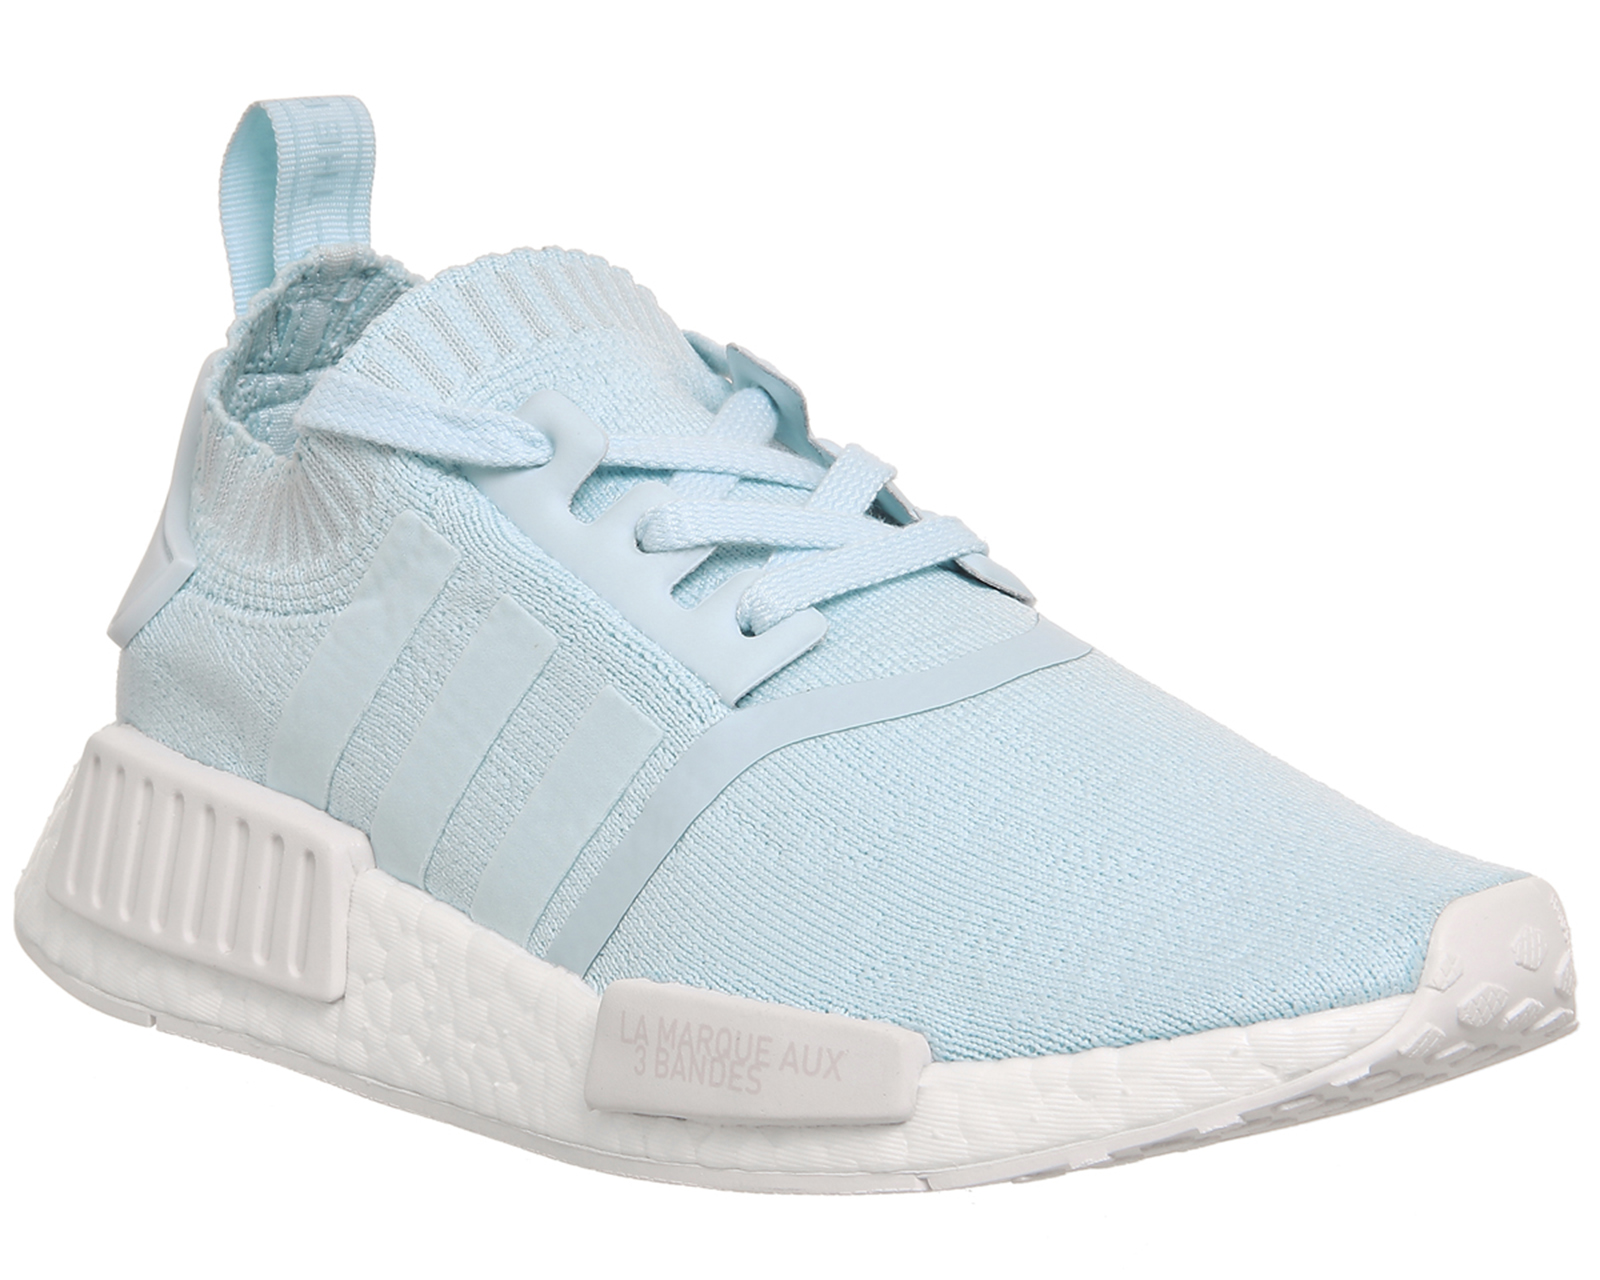 adidas Nmd R1 Prime Knit Ice Blue White - Hers trainers